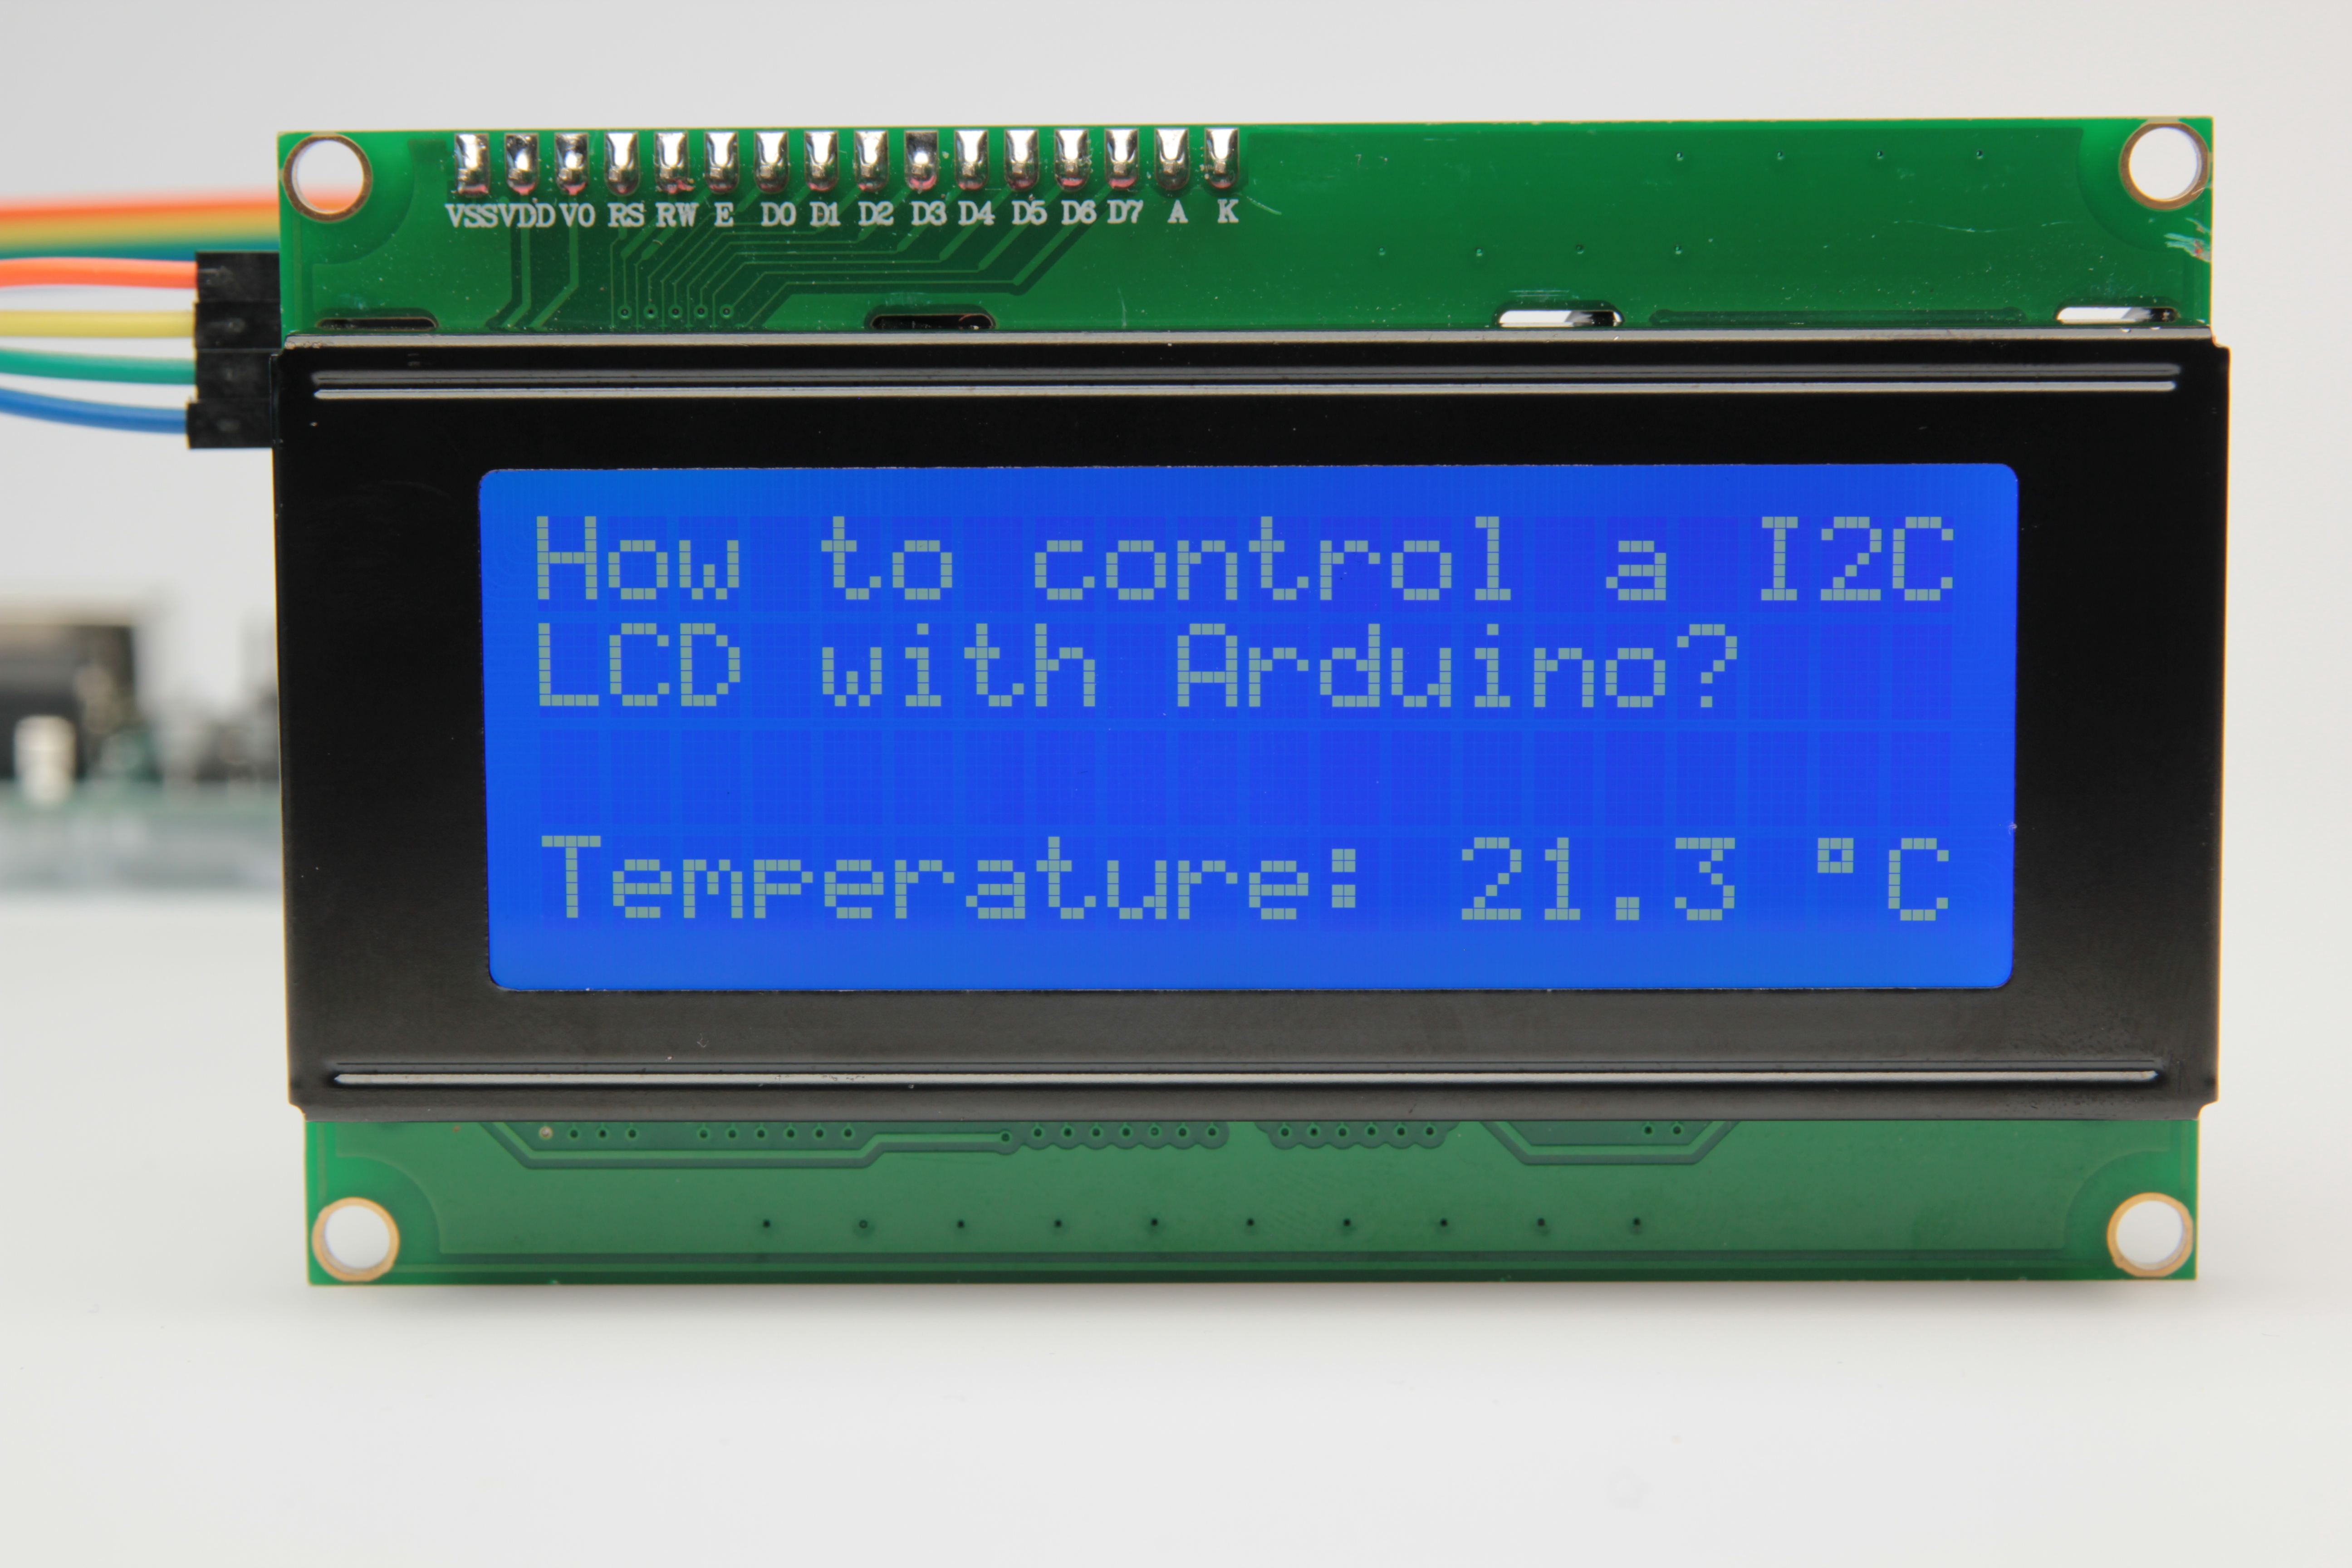 How to control a character I2C LCD with Arduino